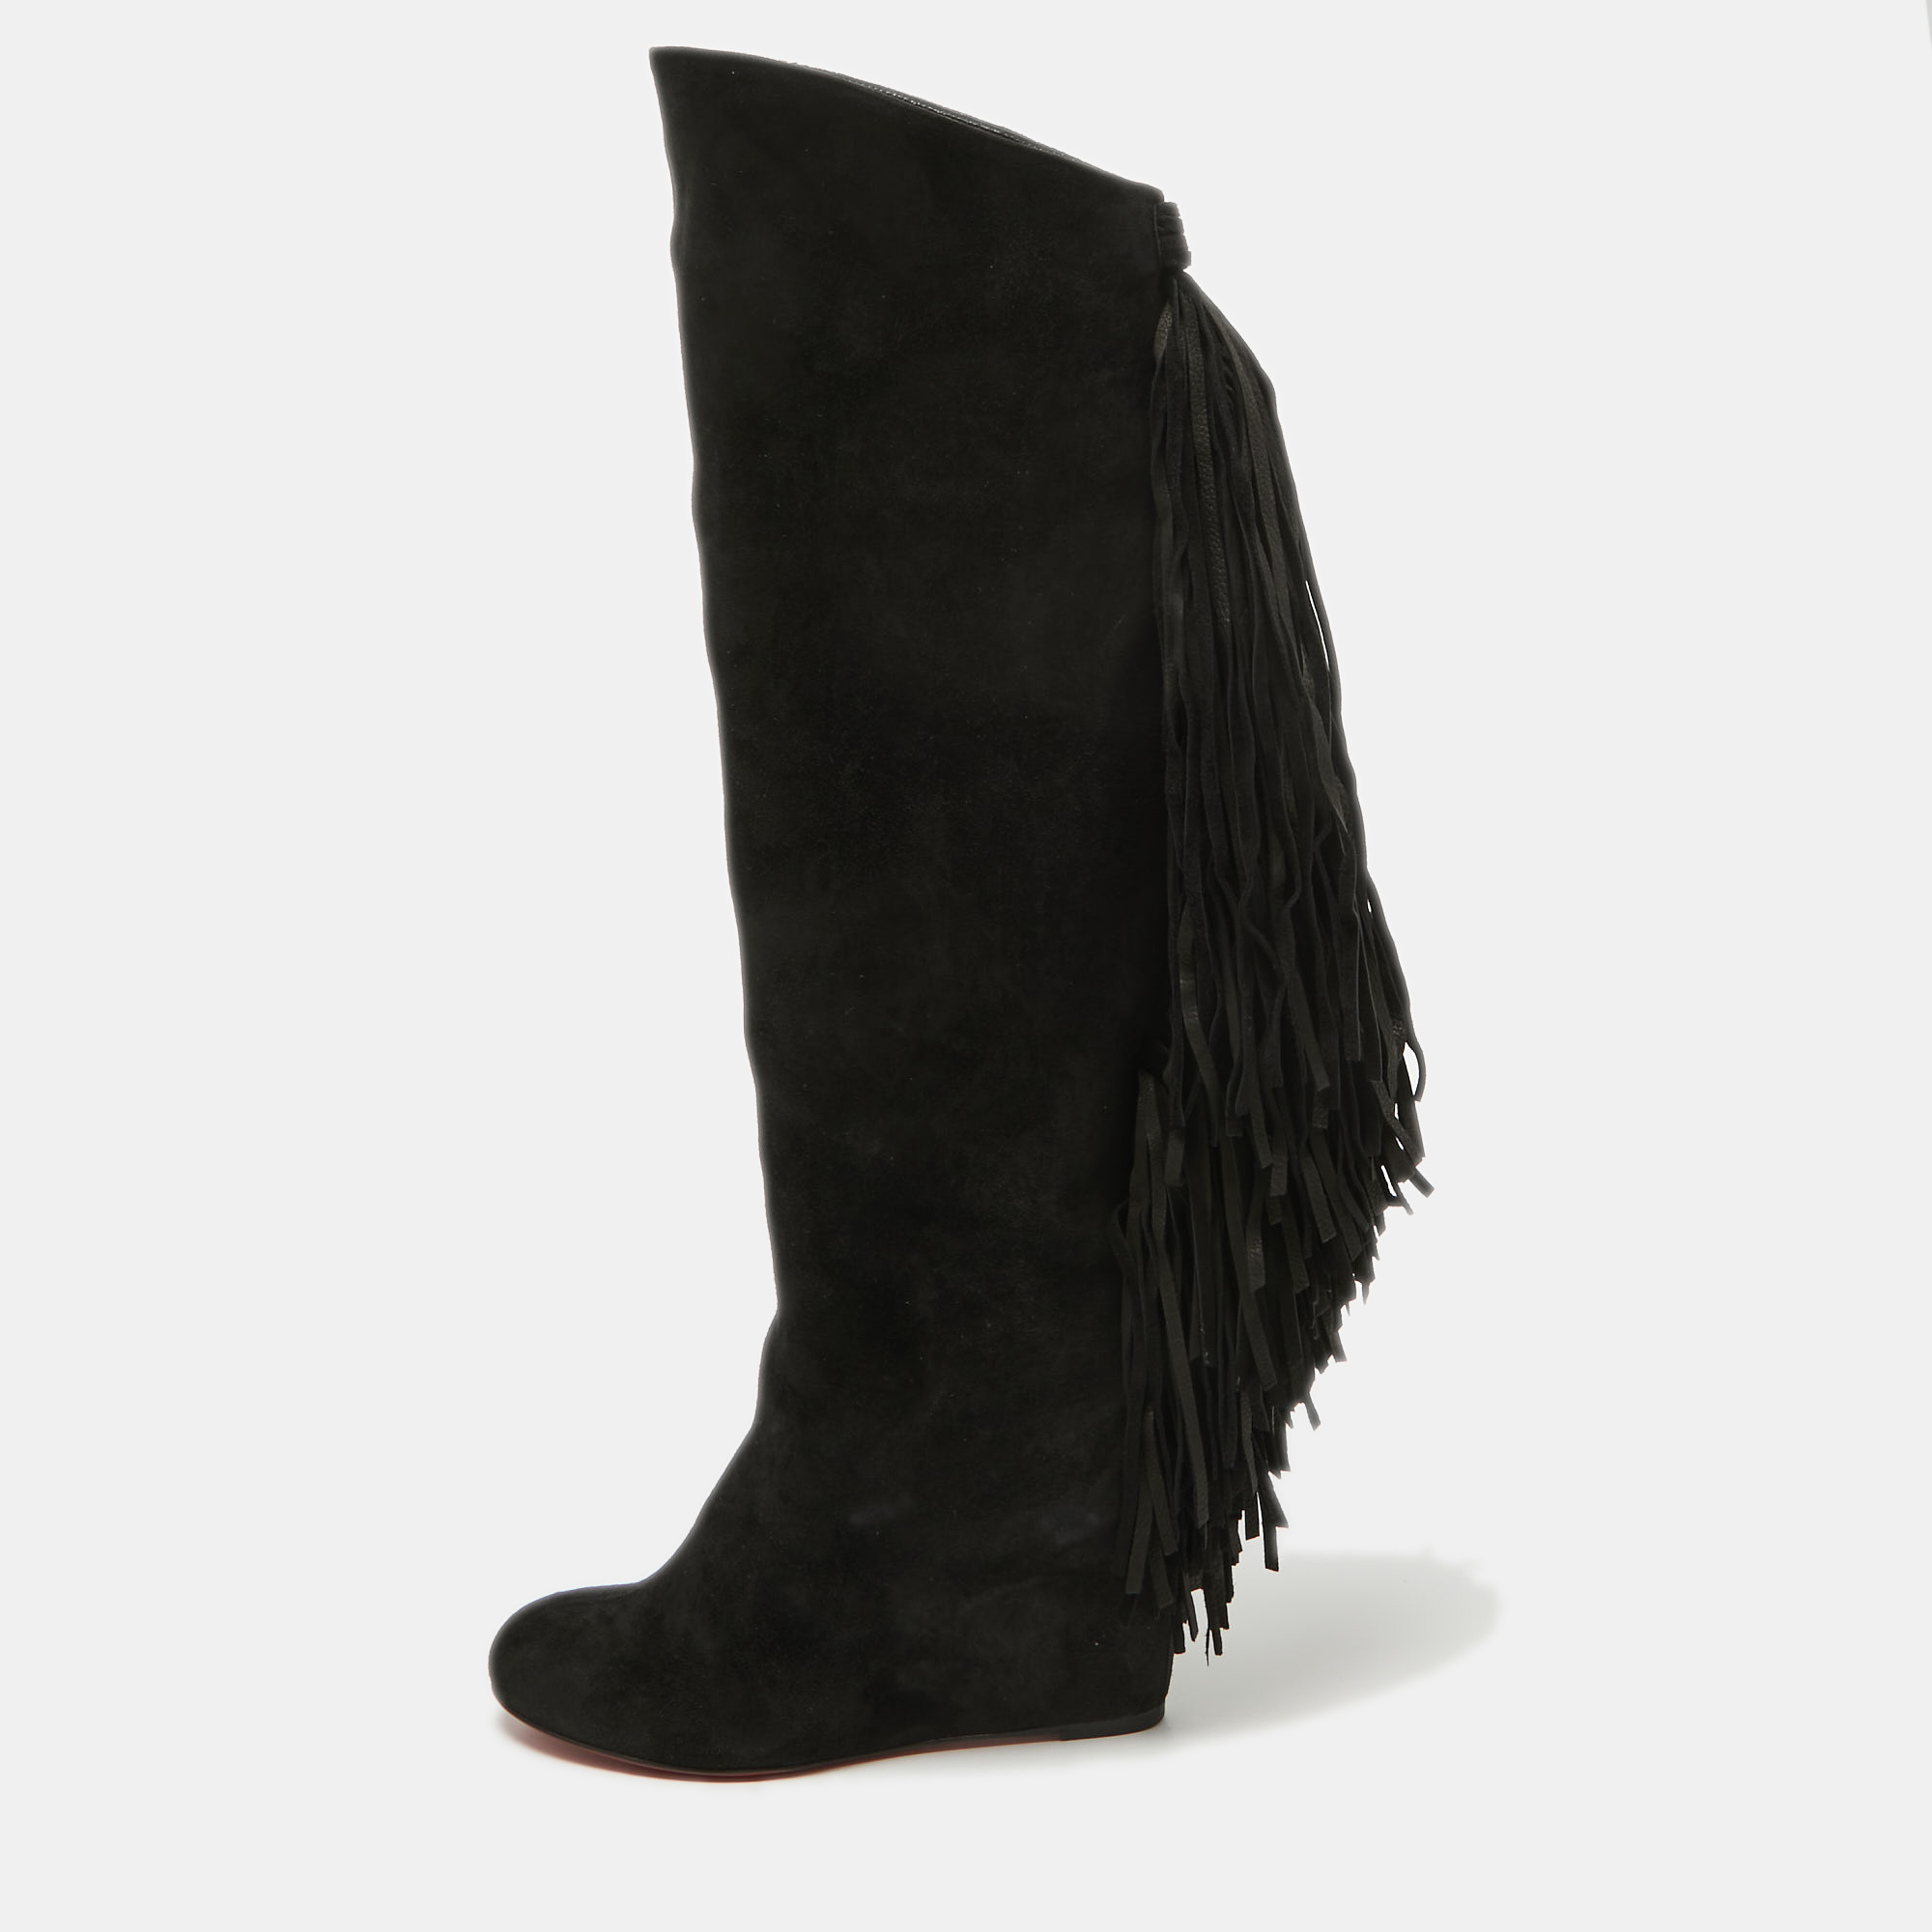 Pre-owned Christian Louboutin Black Suede Knee Length Boots Size 36